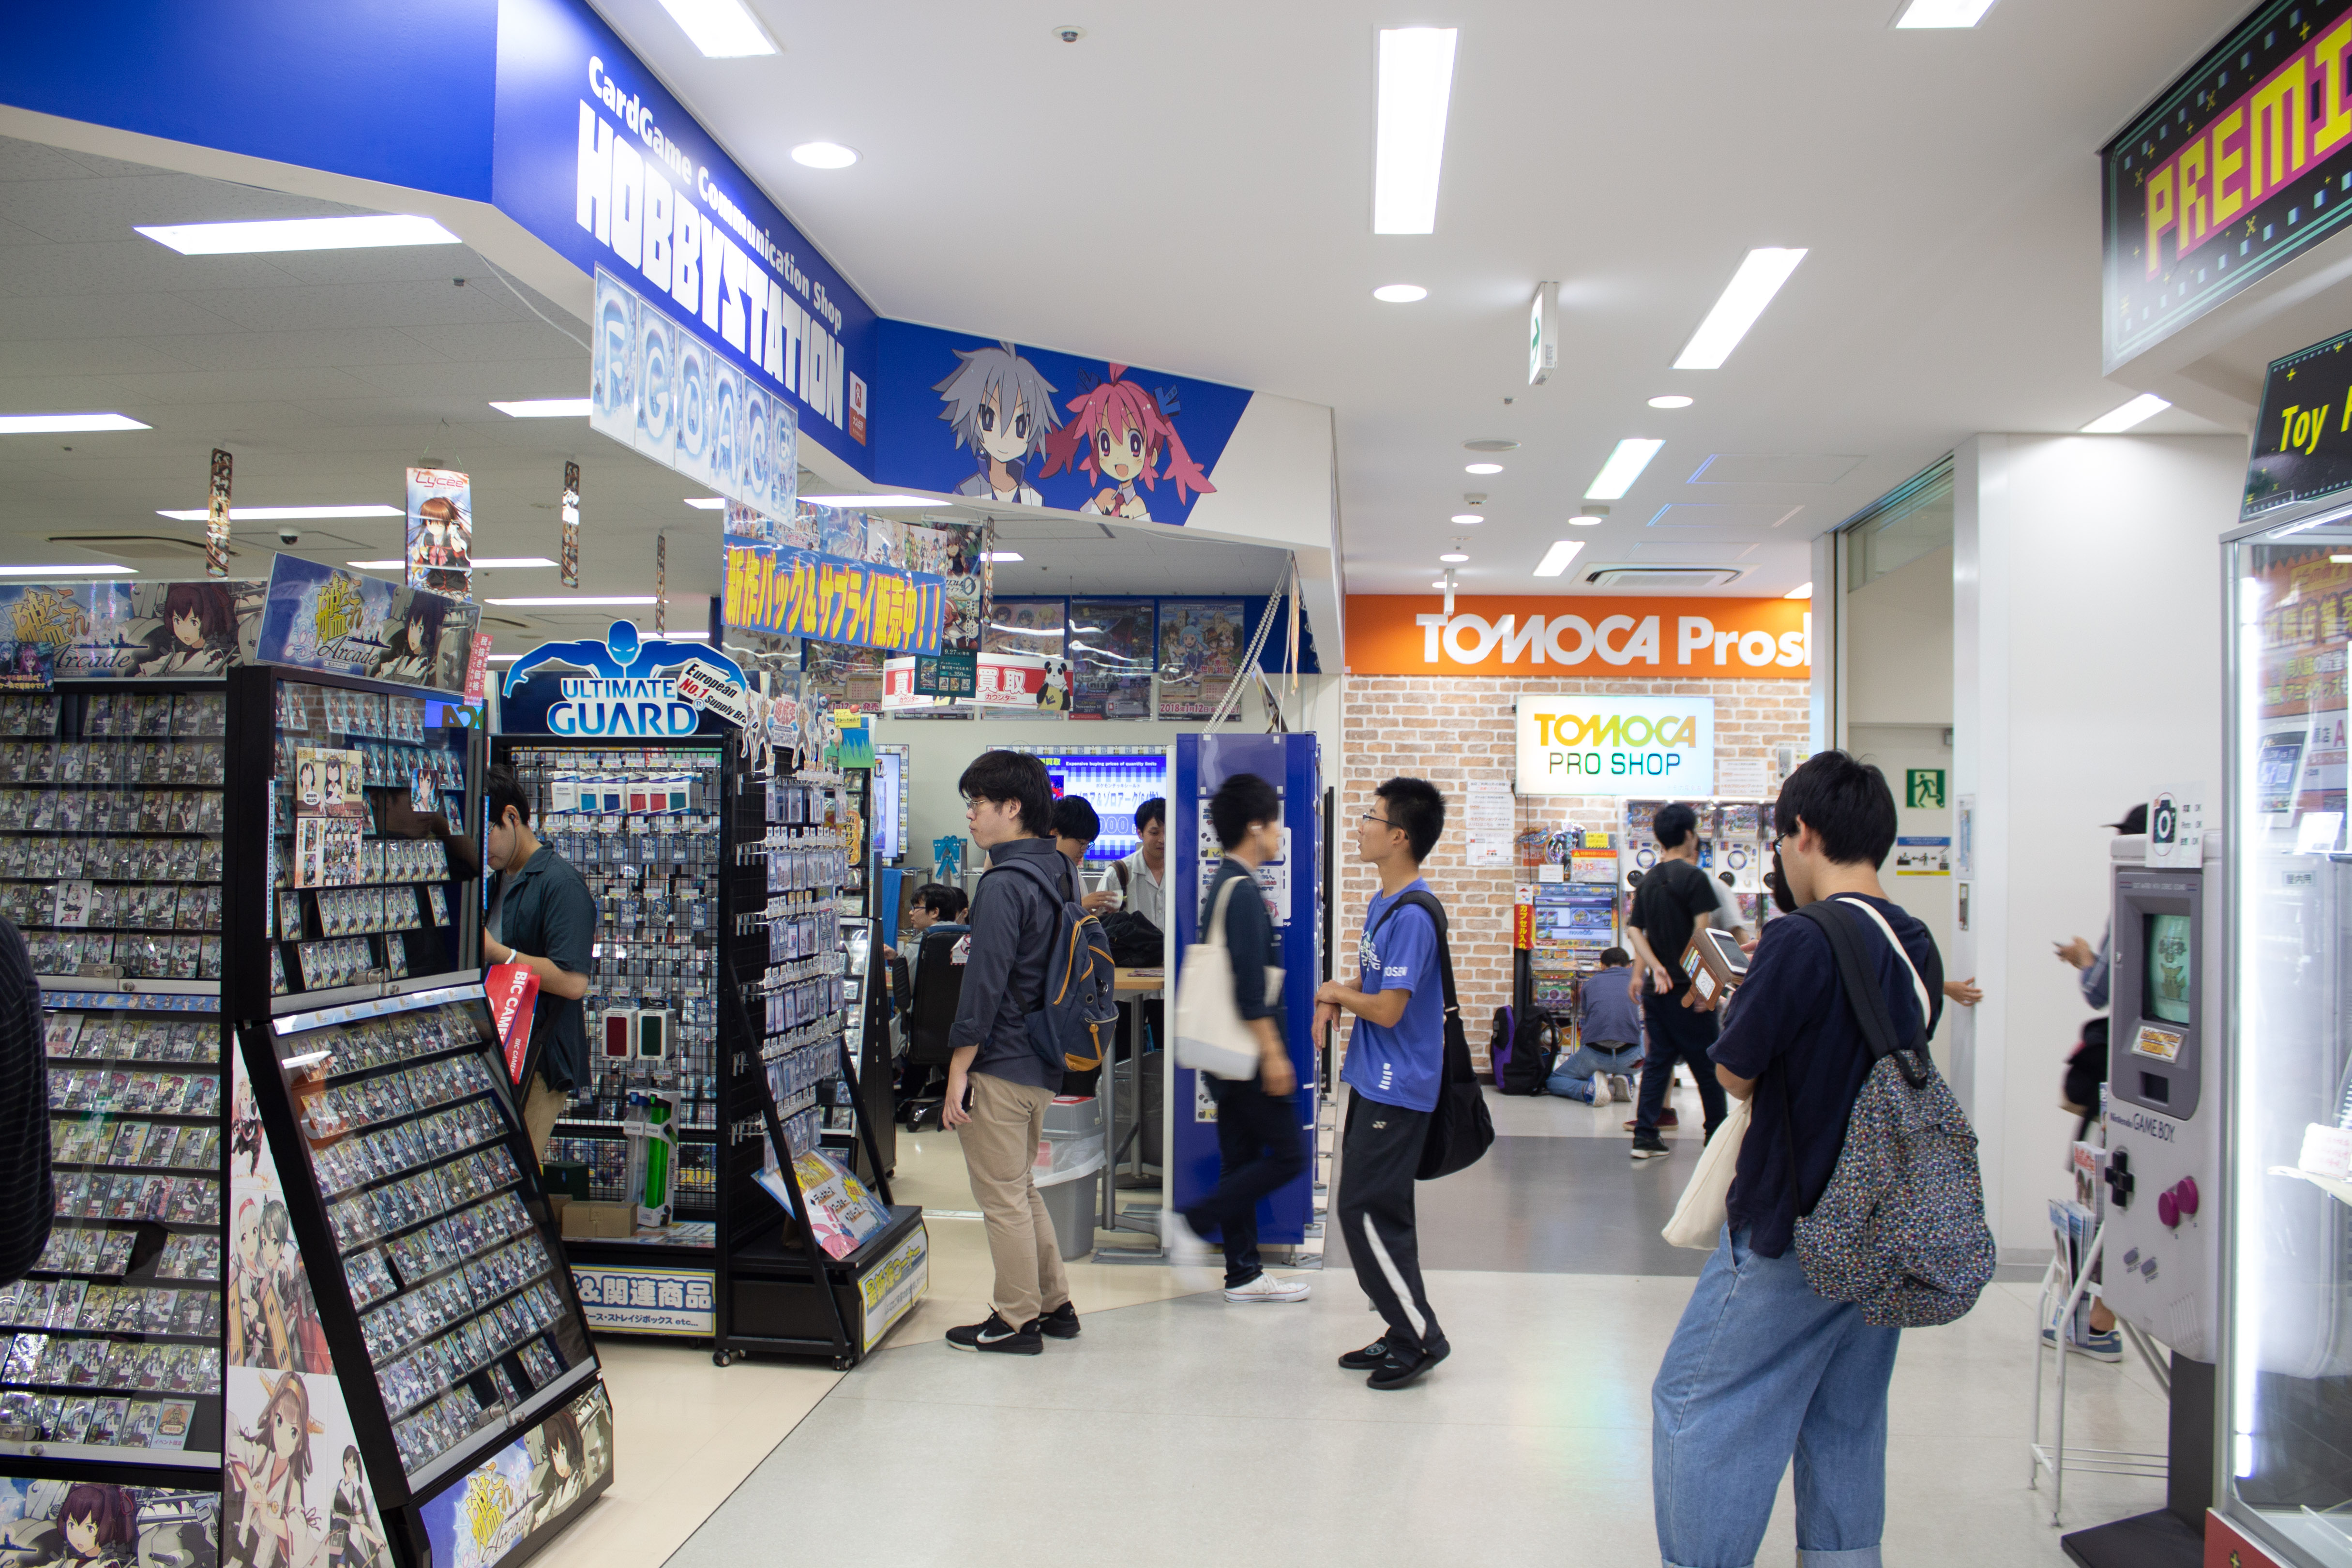 The Ultimate Guide To The Best Anime And Otaku Stores In